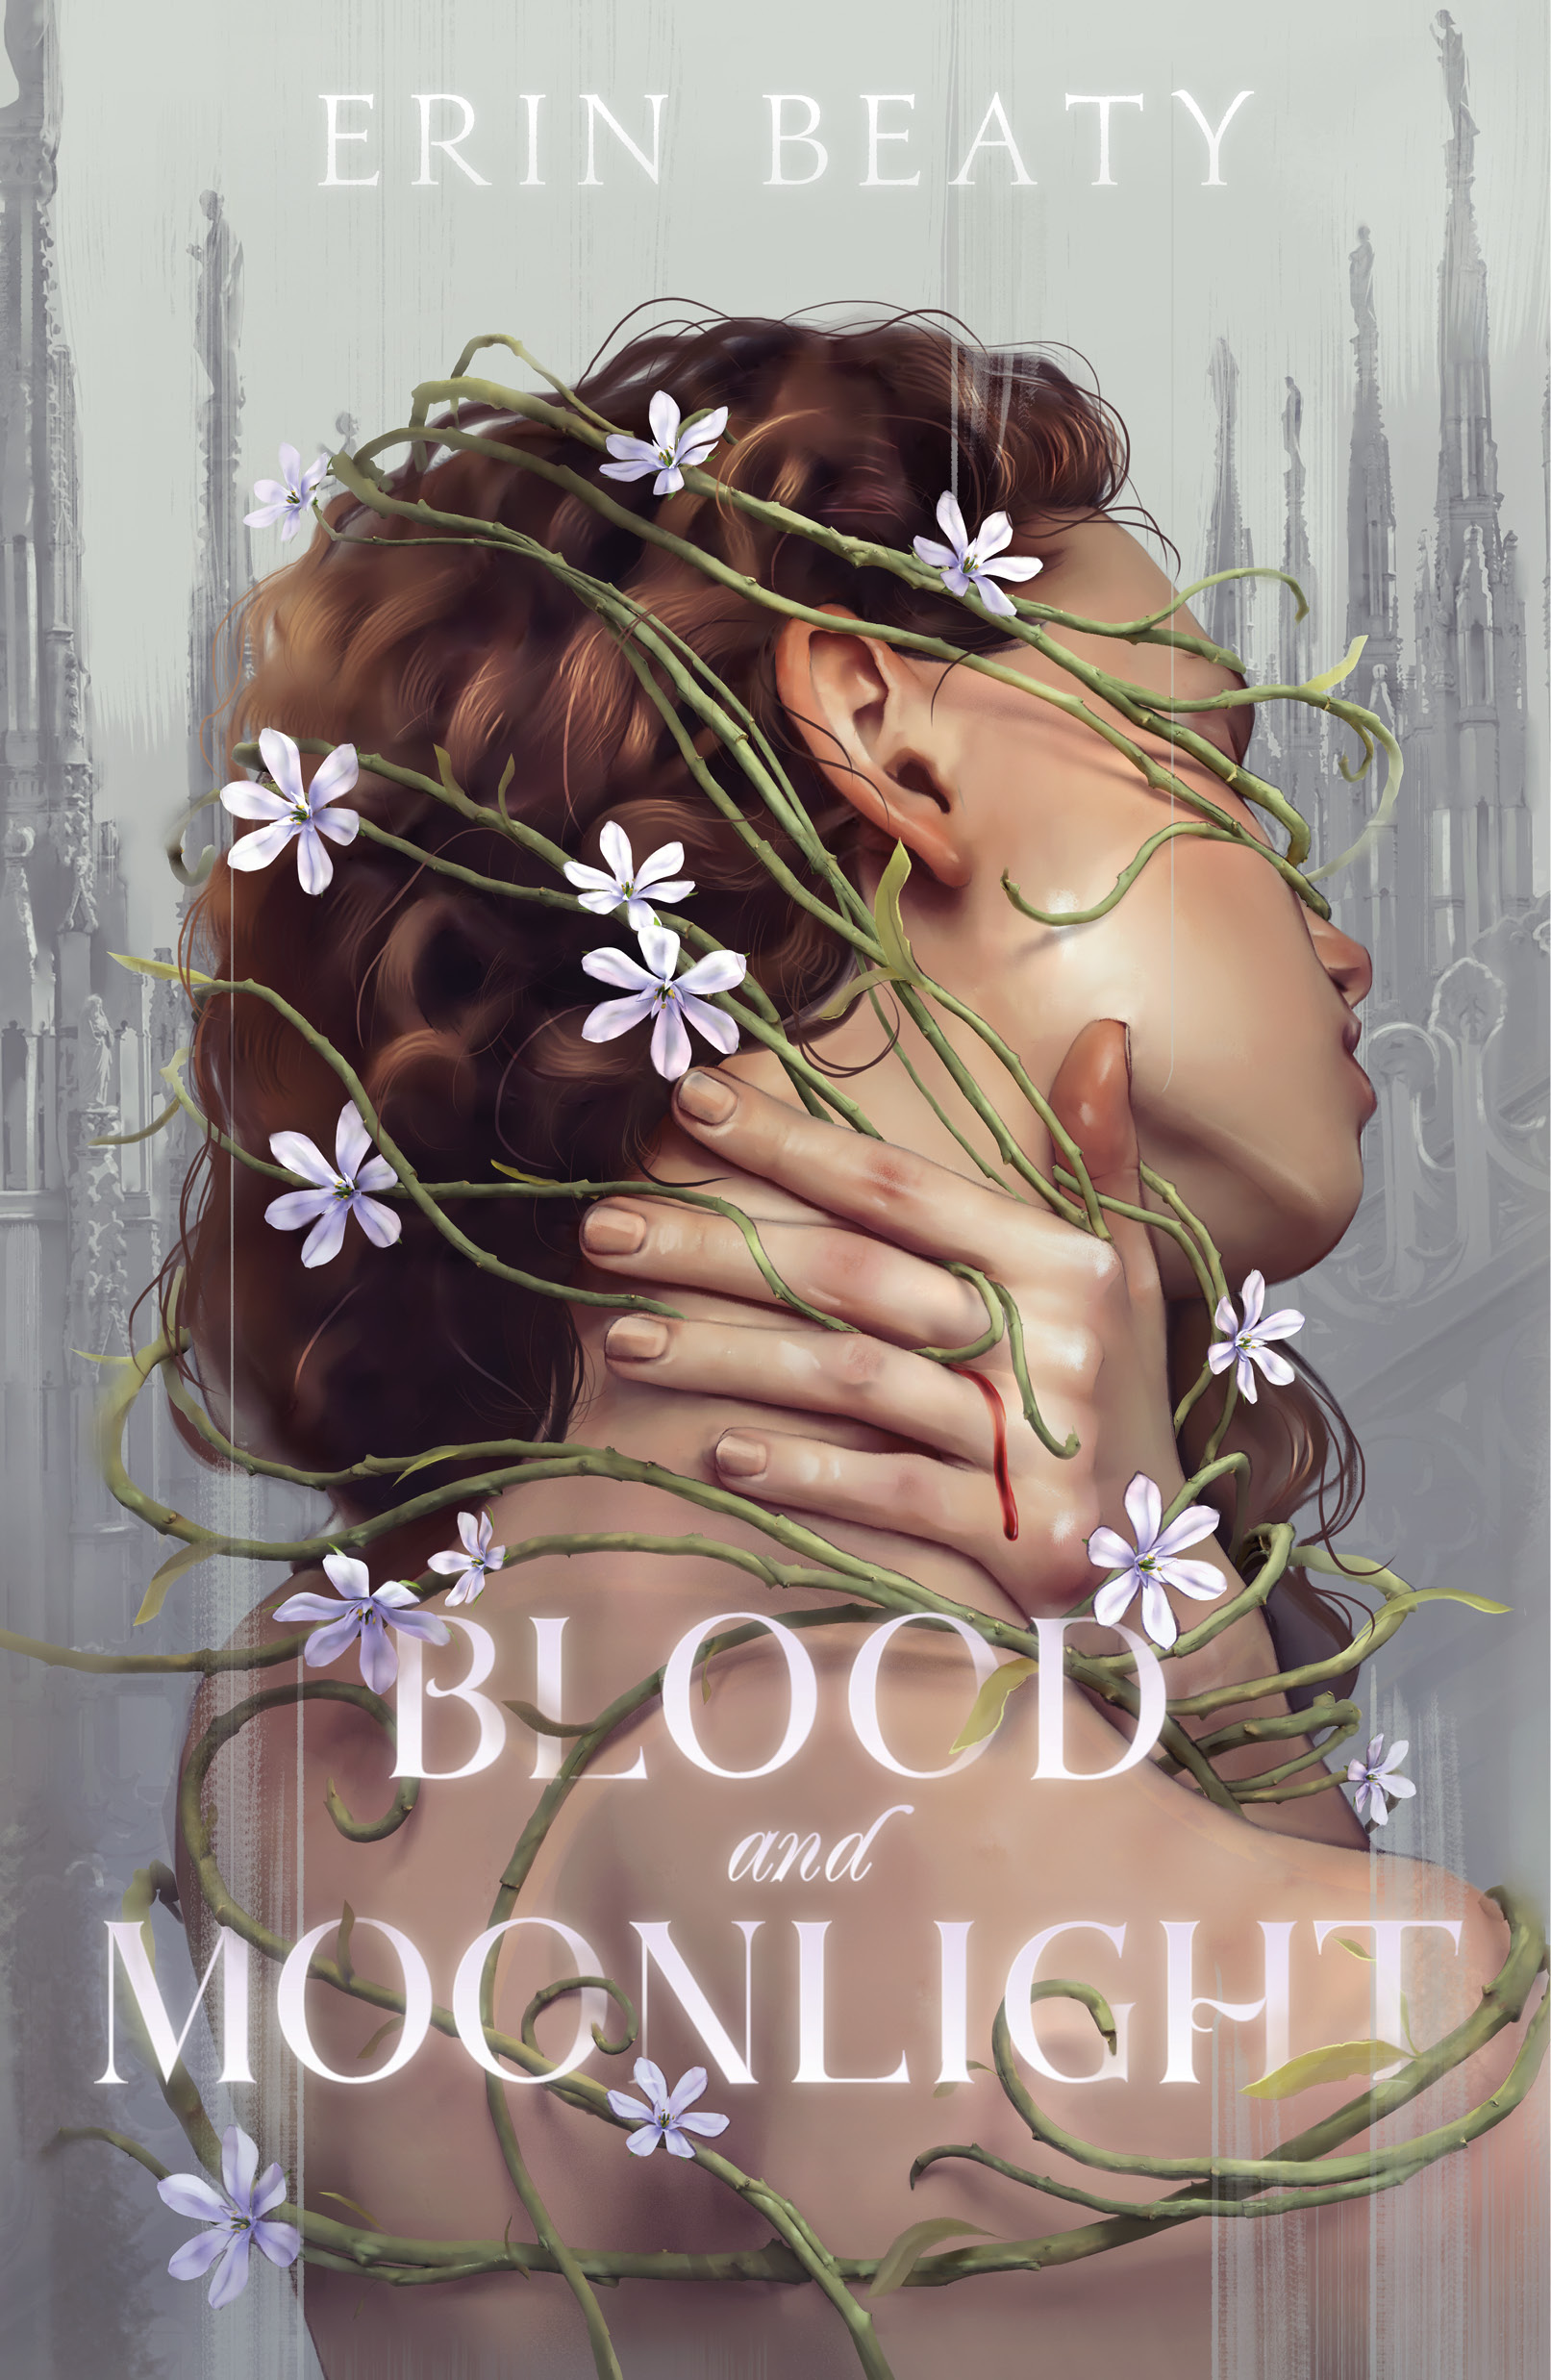 Images for Blood and Moonlight